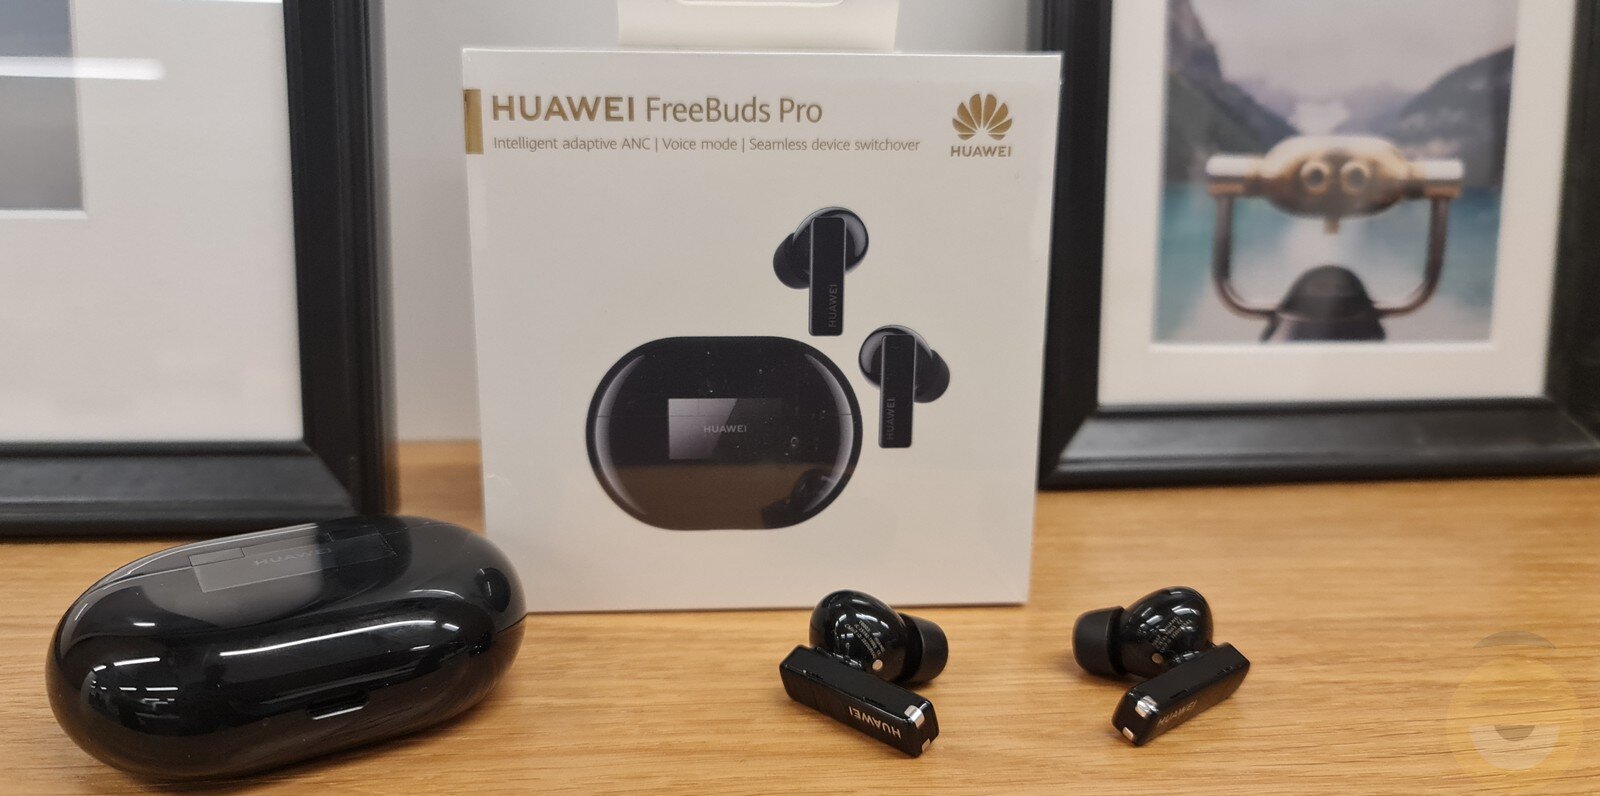 Huawei FreeΒuds Pro Review